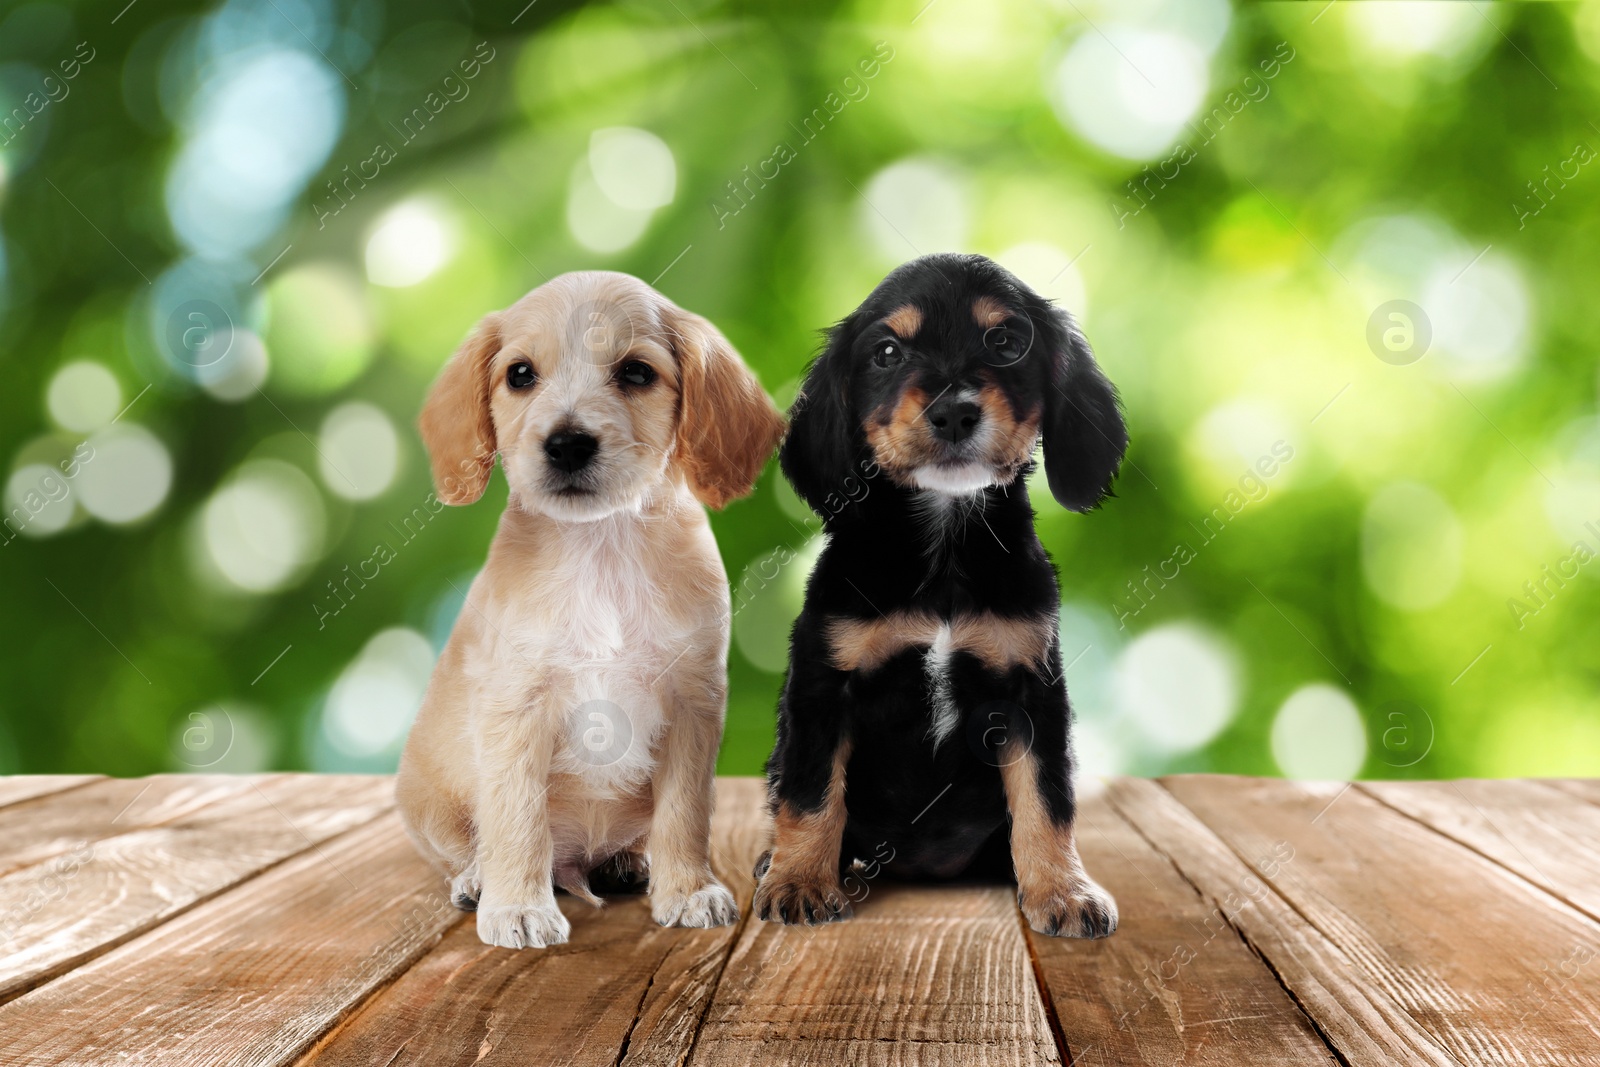 Image of Cute English Cocker Spaniel puppies on wooden surface outdoors, bokeh effect. Adorable pets